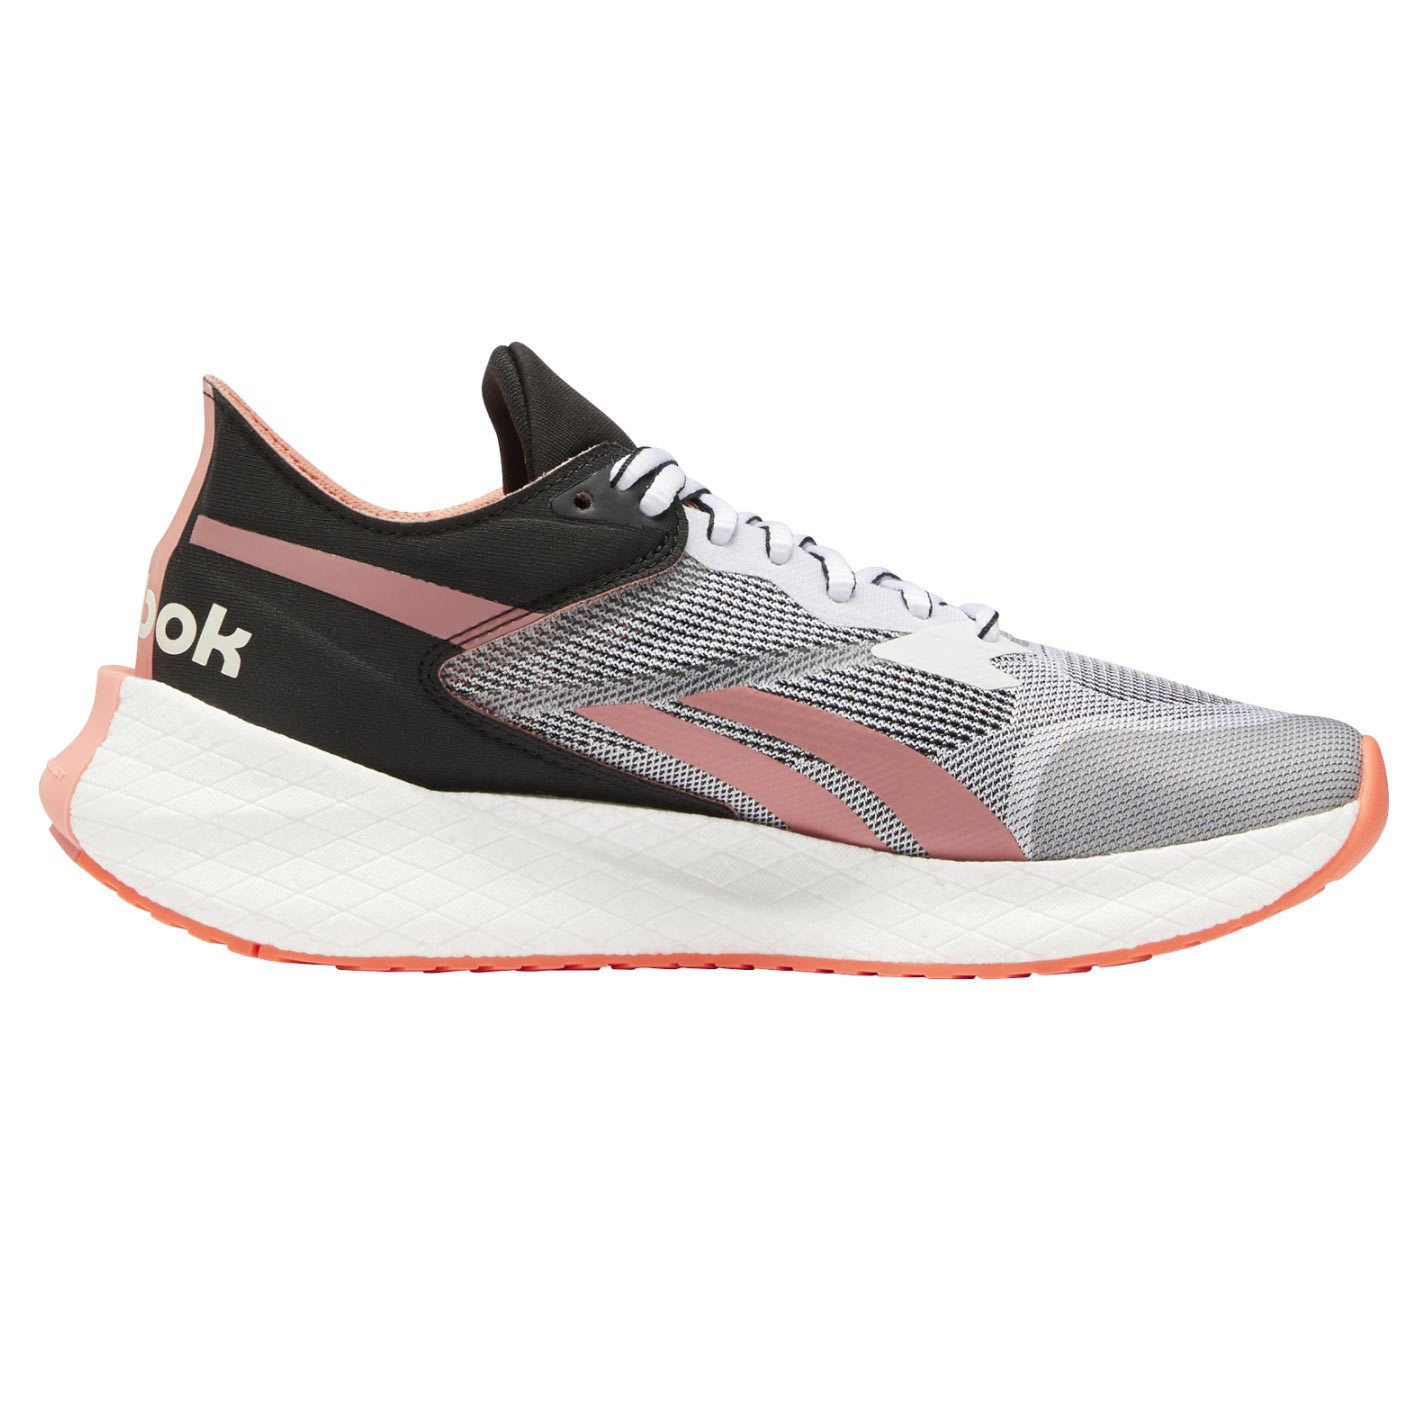 Picture of Reebok Floatride Energy Symmetros Running Shoes Women - footwear white/core back/twisted coral FW9392